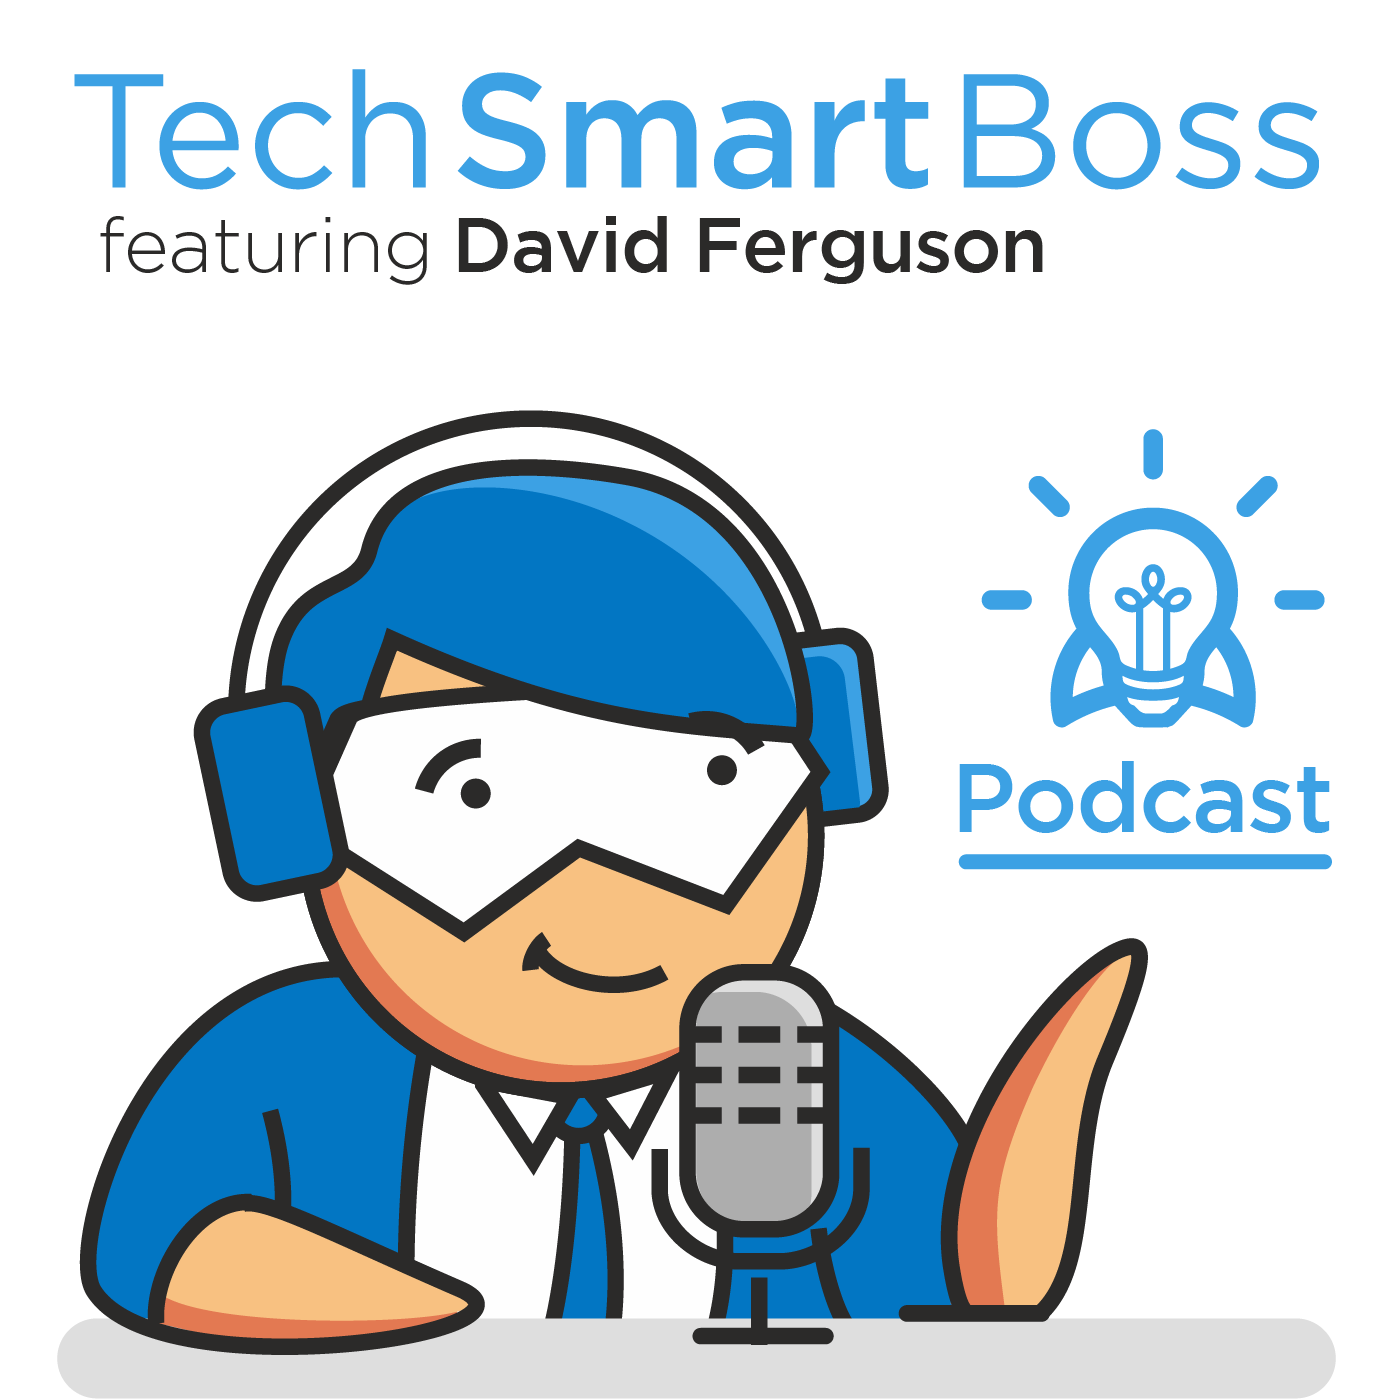 Episode 94: 7 Steps to Start Your Own Podcast (The Tech Smart Boss Way)